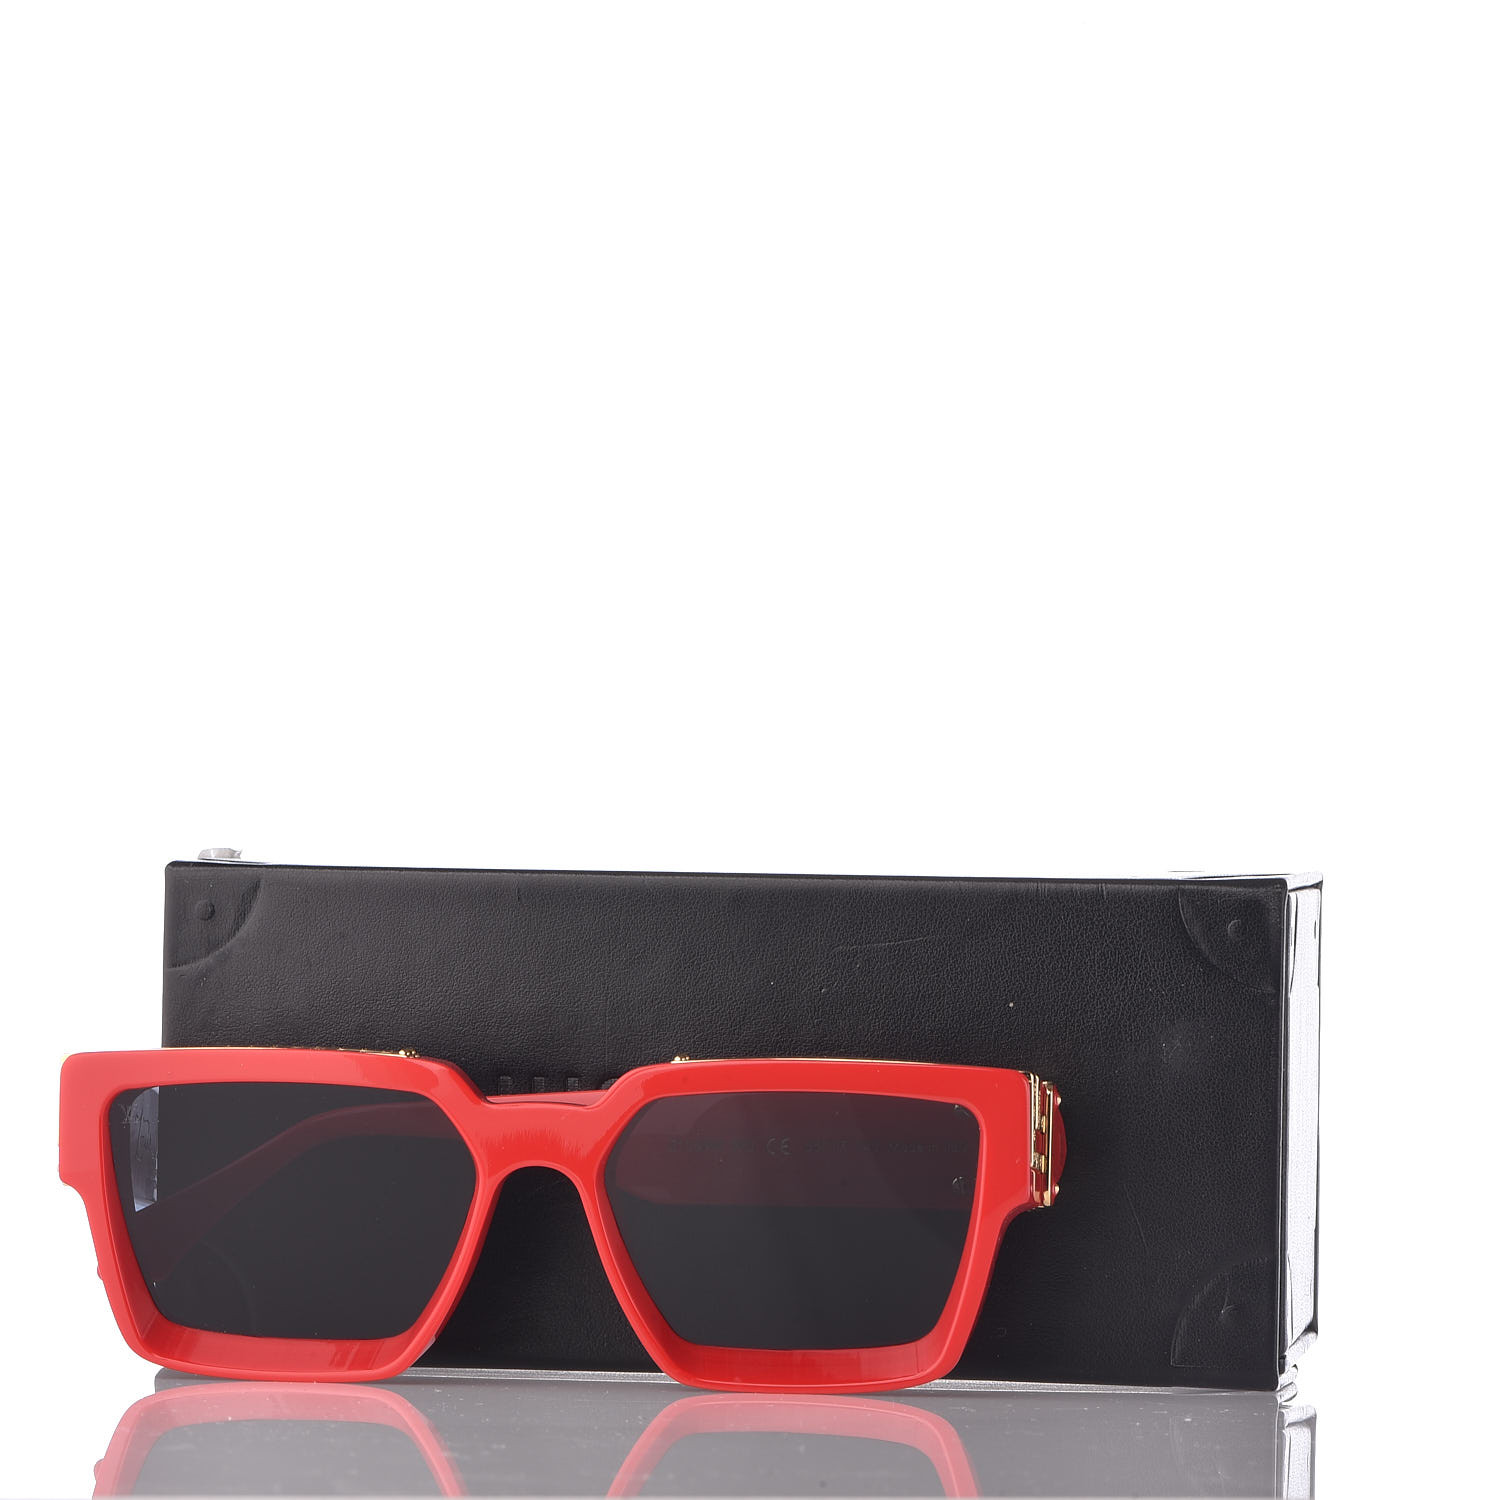 Louis vuitton Red 2019 1.1 Millionaires Sunglasses of Tyga in the